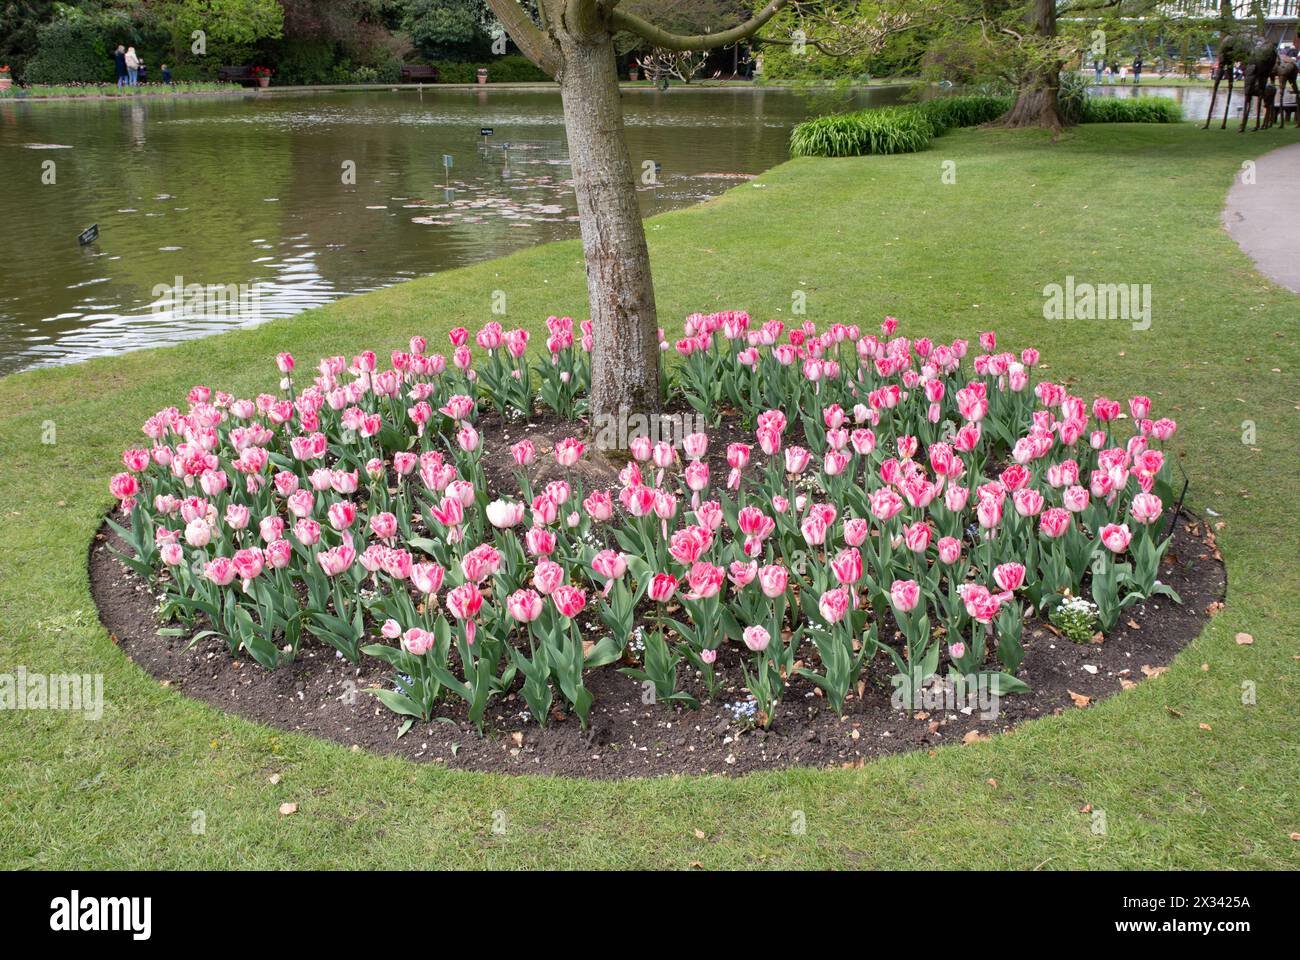 Tulip Foxtrot planted around a tree in a circular bed in Burnby Hall Gardens during the Tulip Festival Stock Photo